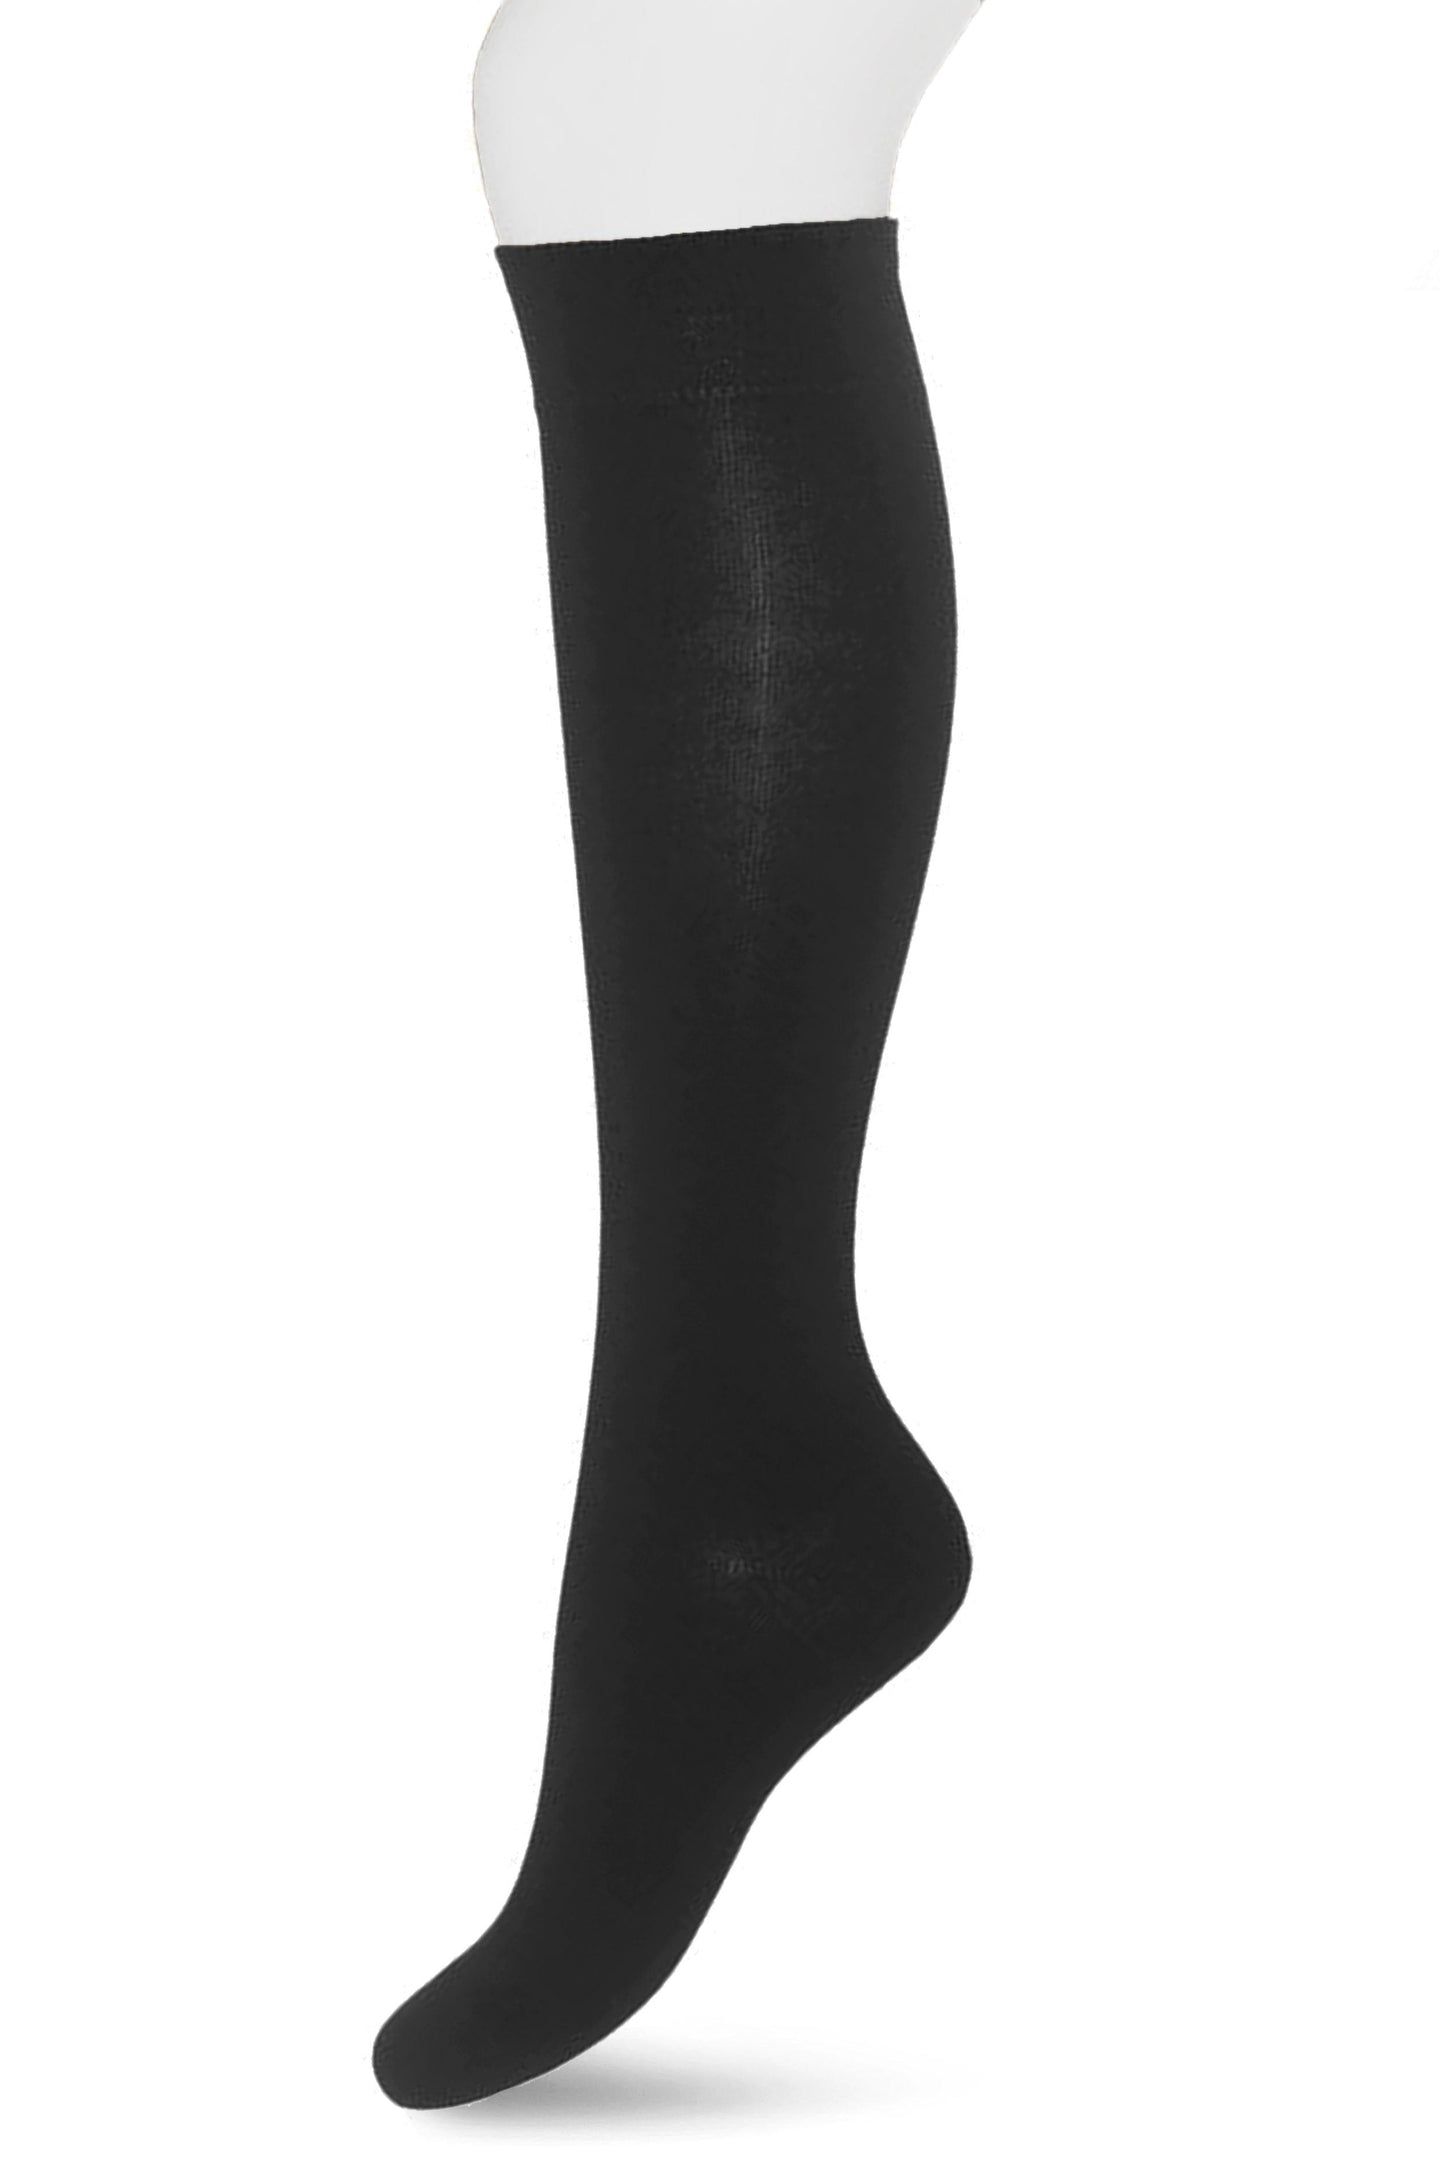 Bonnie Doon Wool/Cotton Knee-High R715011 - black thermal knee socks perfect for cold Winters